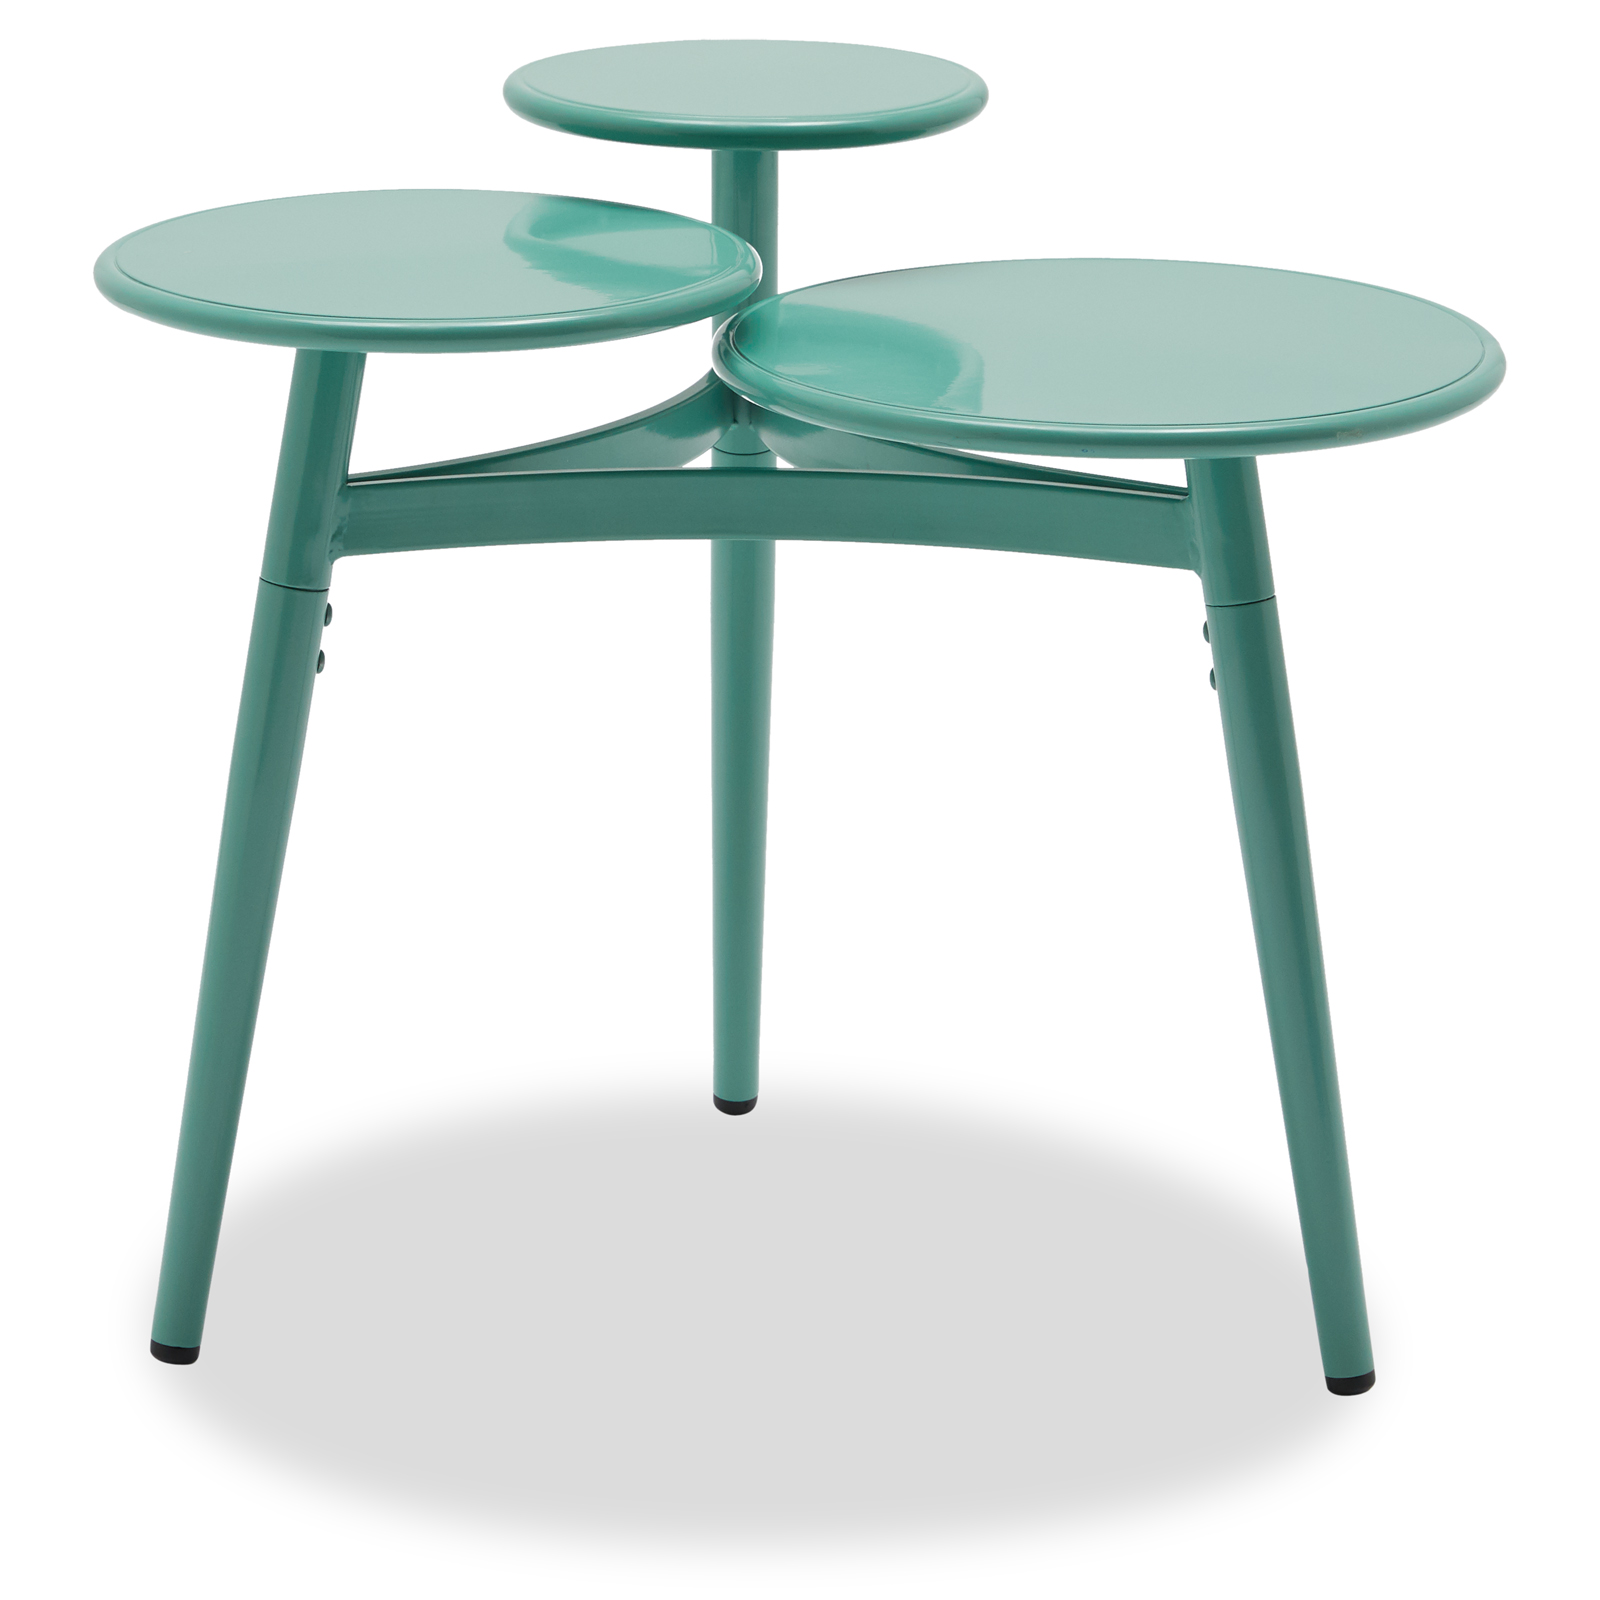 Multi-Tier Metal Accent Table, Multiple Colors by Drew Barrymore Flower Home - image 1 of 14